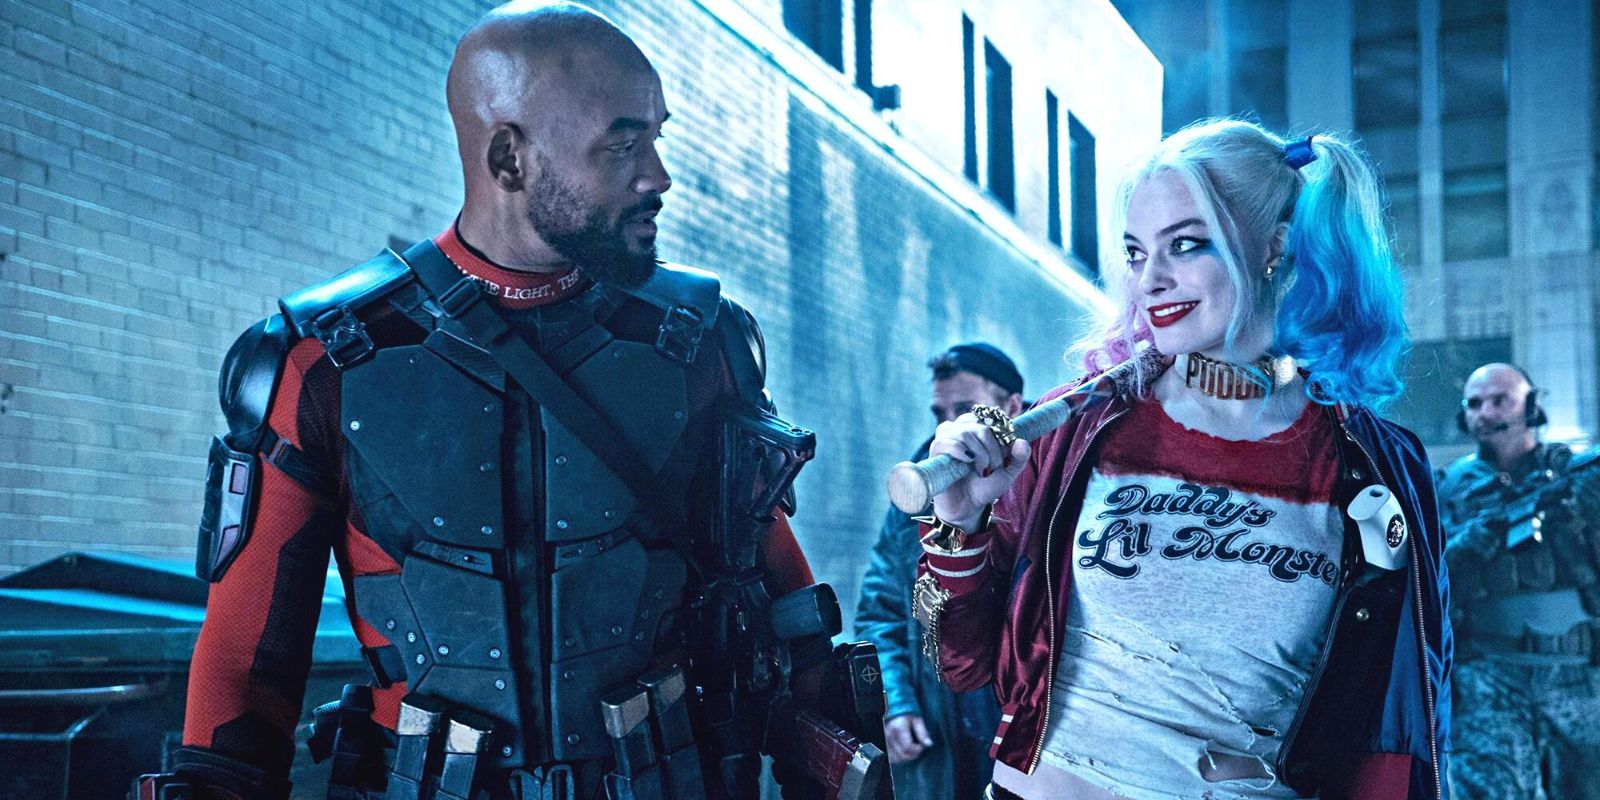 Deadshot and Harley Quinn share a cheeky smile in a dark alley in Suicide Squad